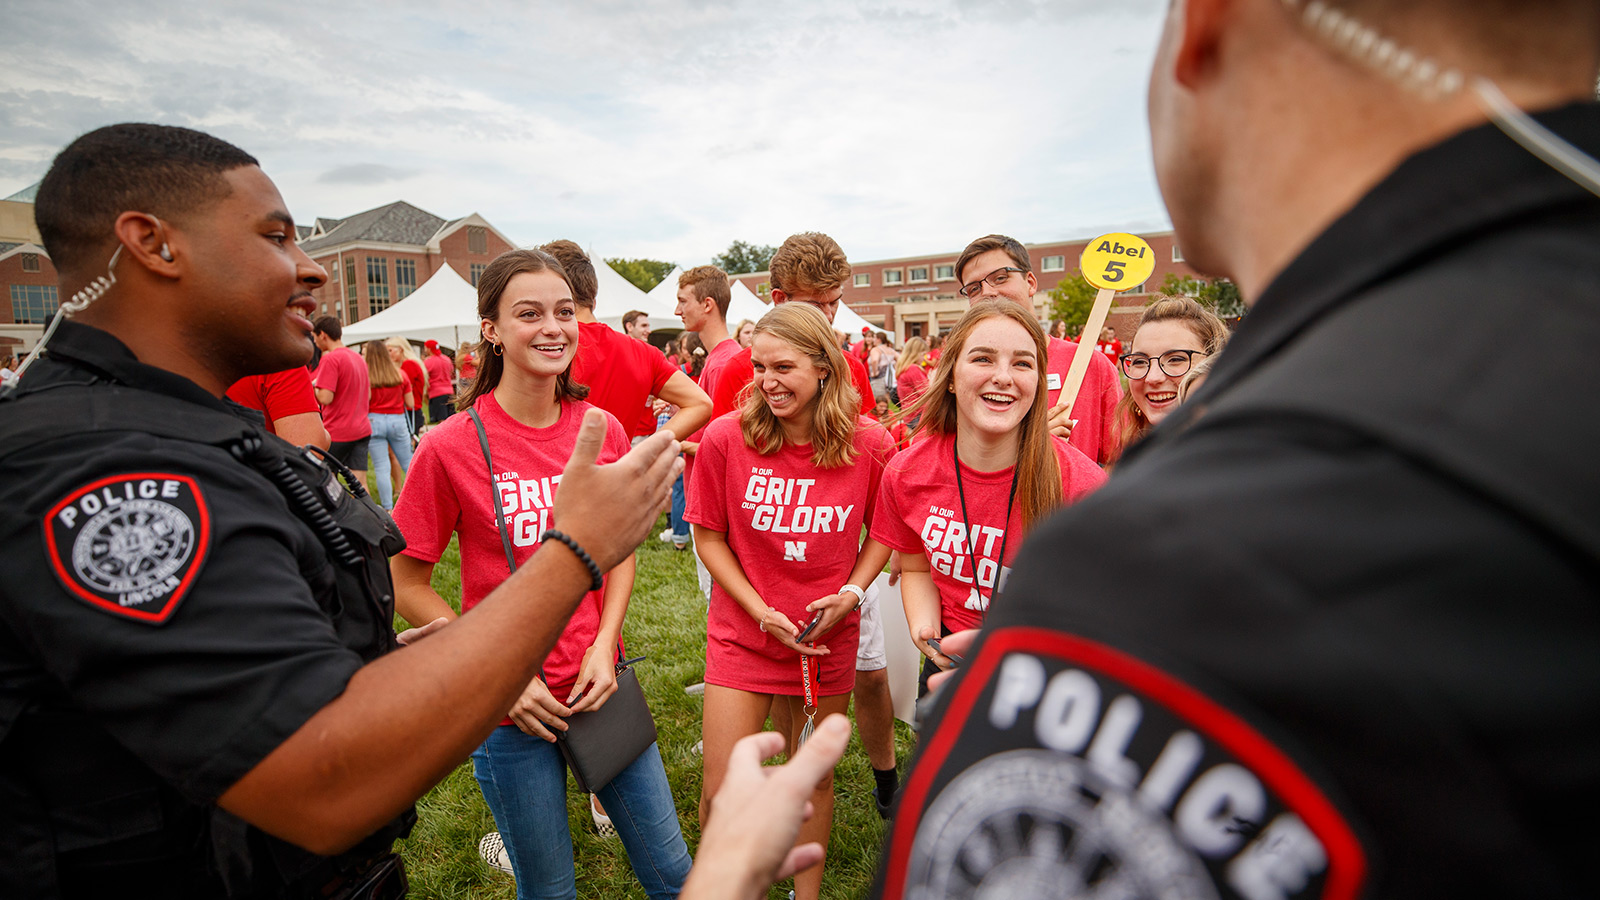 Two police officers talk to a group of students during a picnic on the Green space on campus.